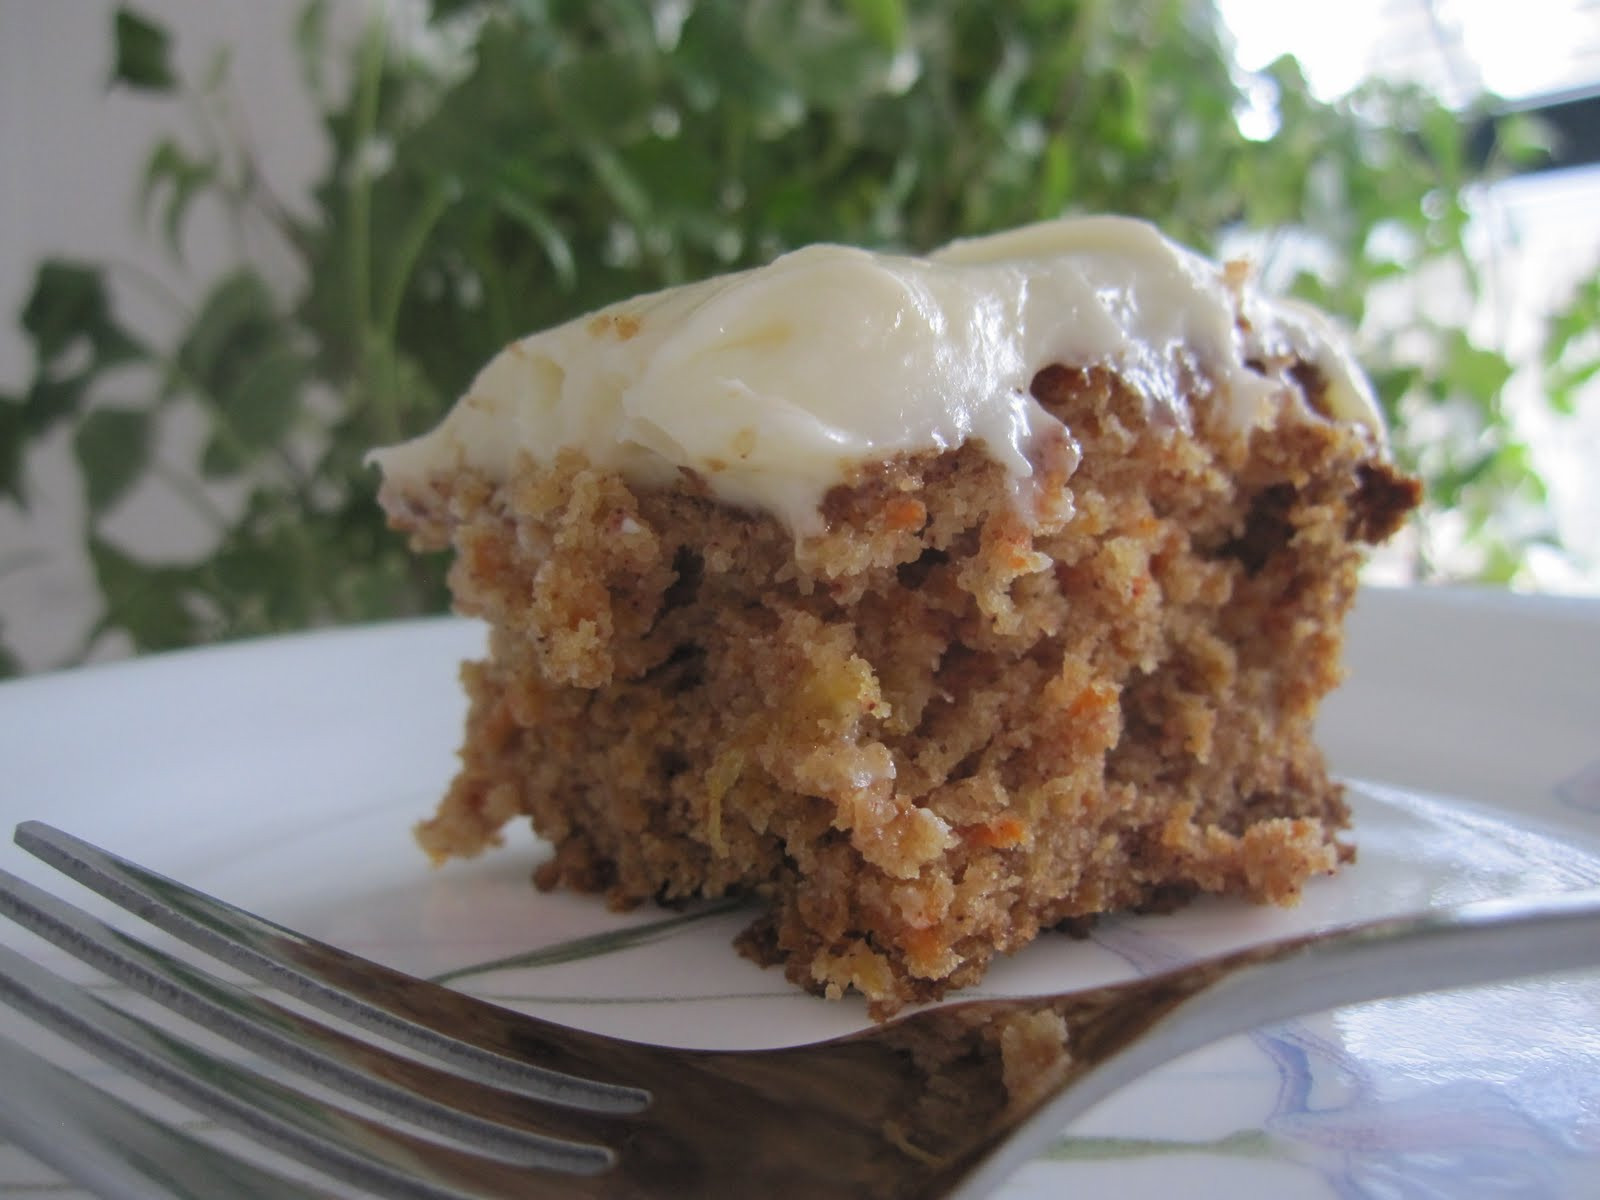 Gluten Free Carrot Cake With Pineapple
 Mennonite Girls Can Cook Pineapple Carrot Cake Gluten Free